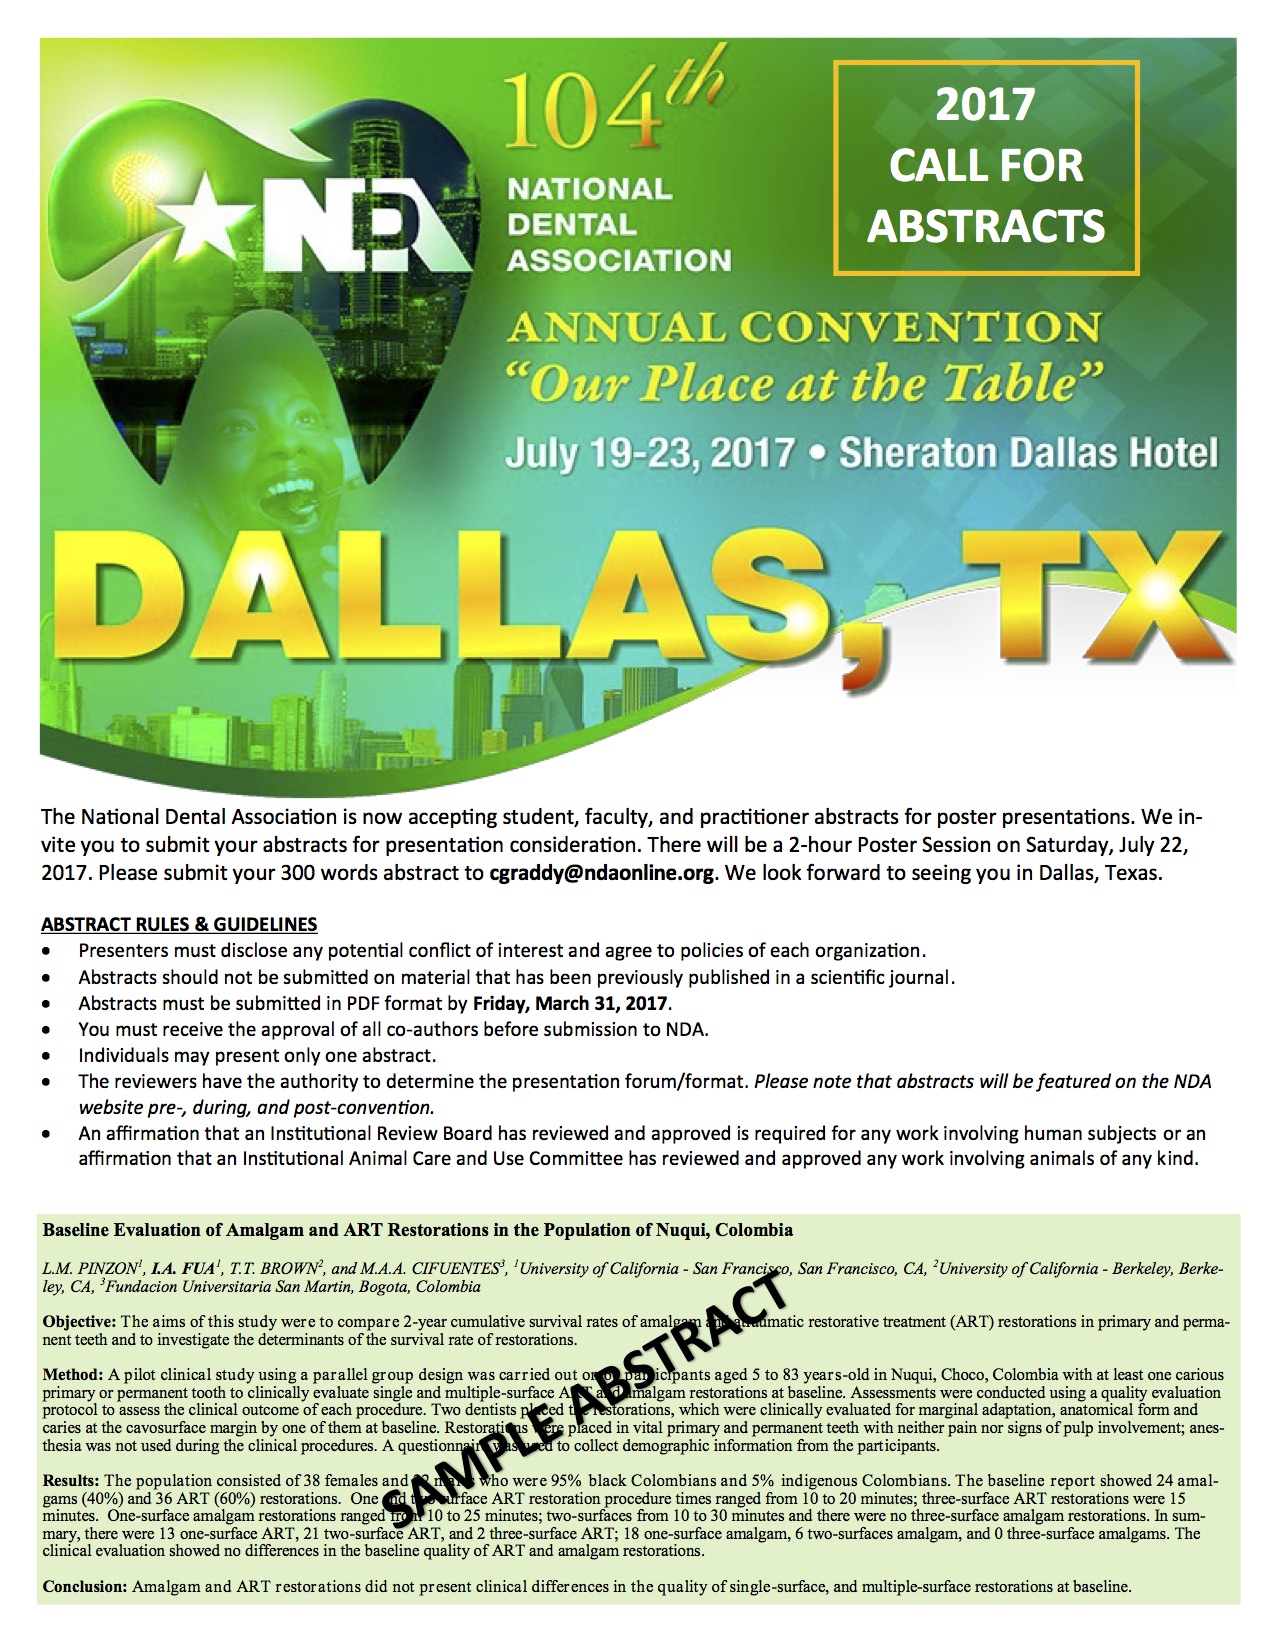 2017 Call for Abstracts National Dental Association